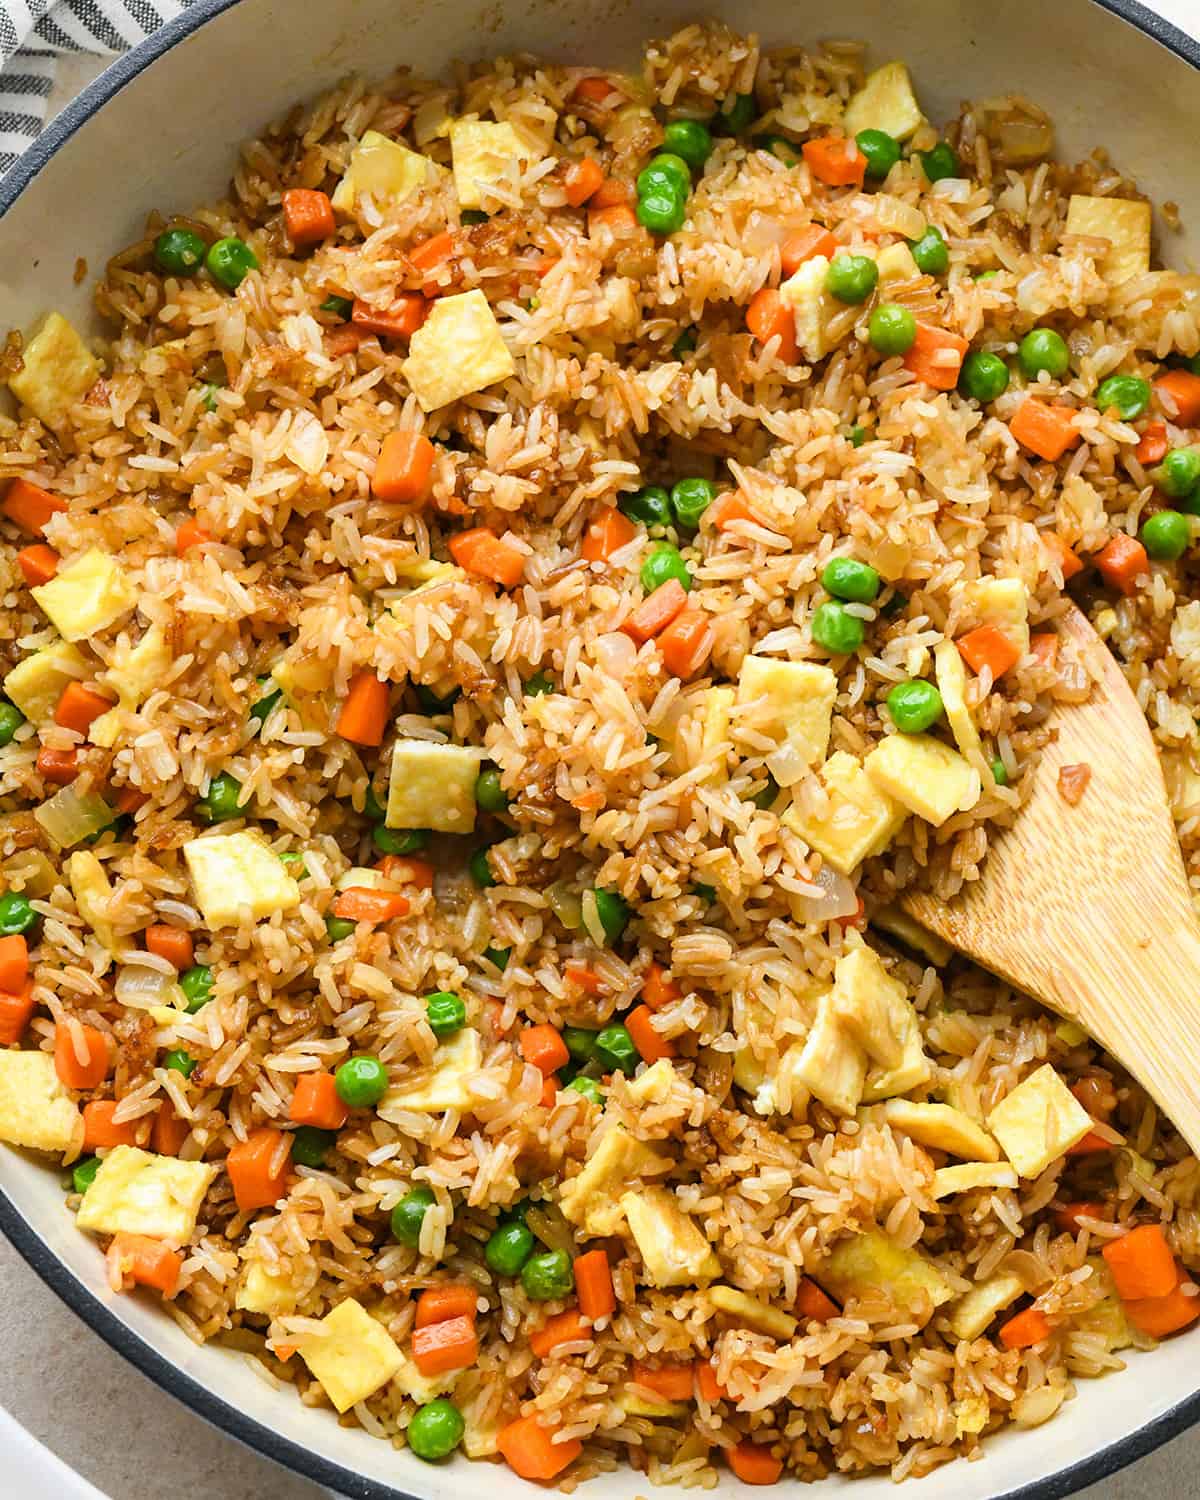 How to Make Fried Rice - adding eggs  after mixing